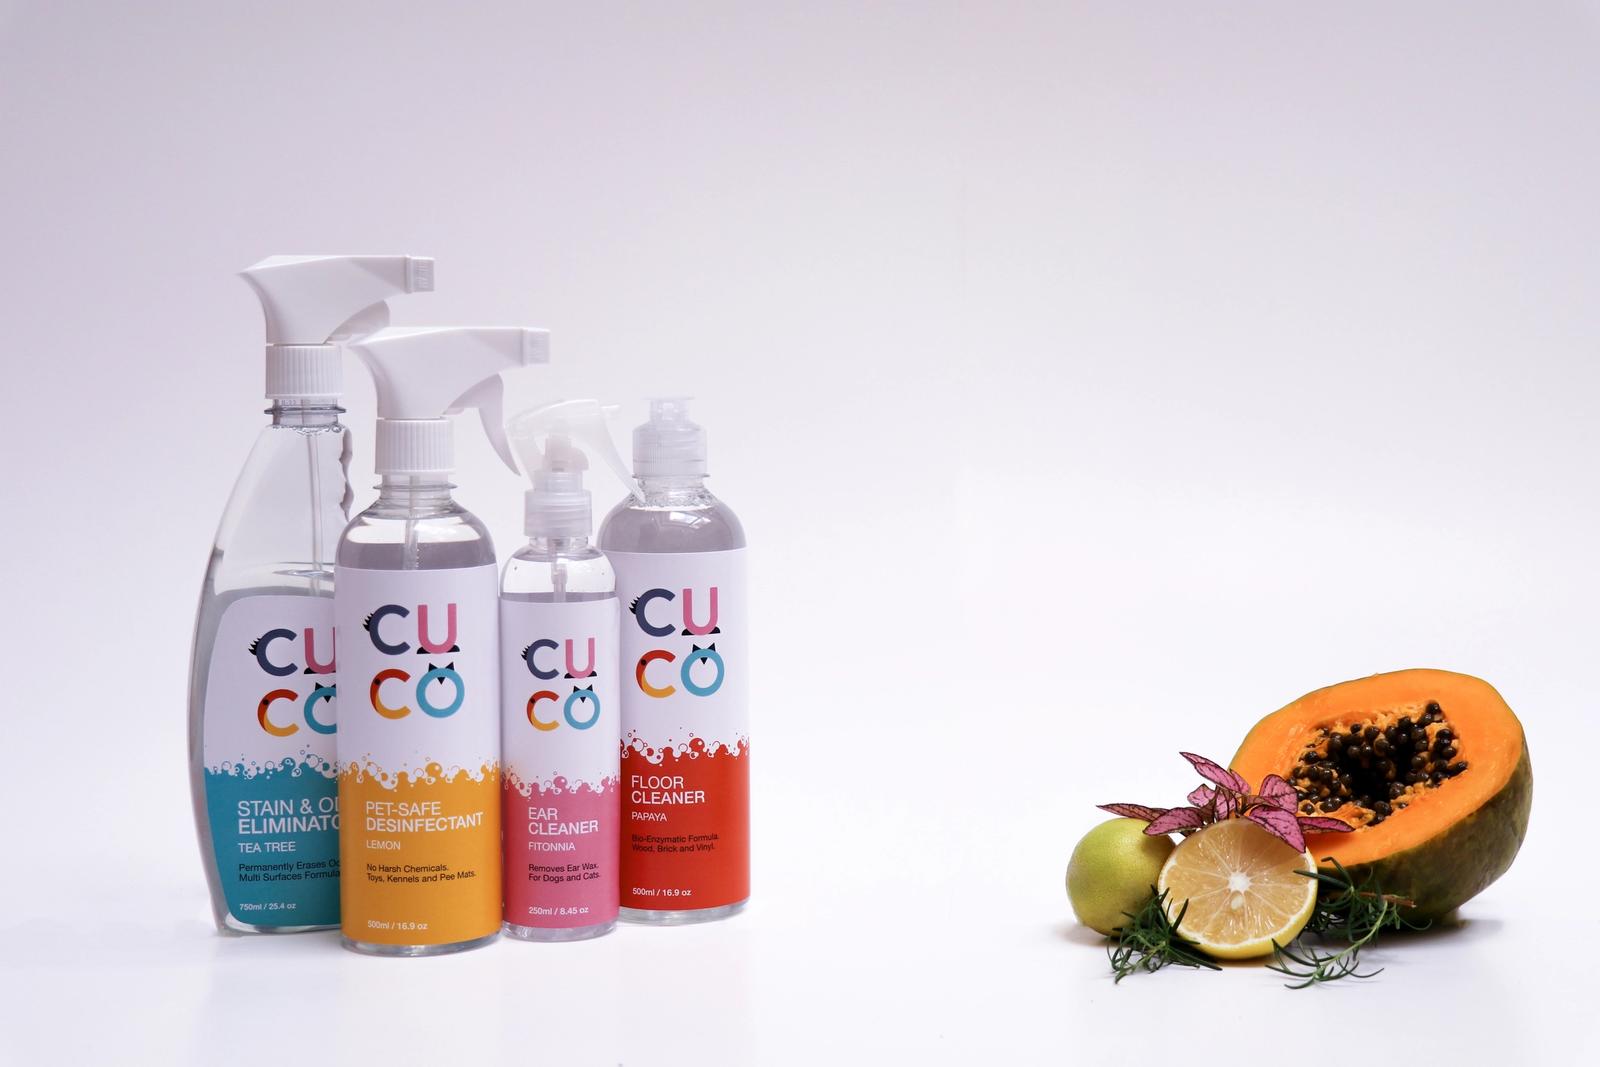 Cuco pet-safe cleaning products